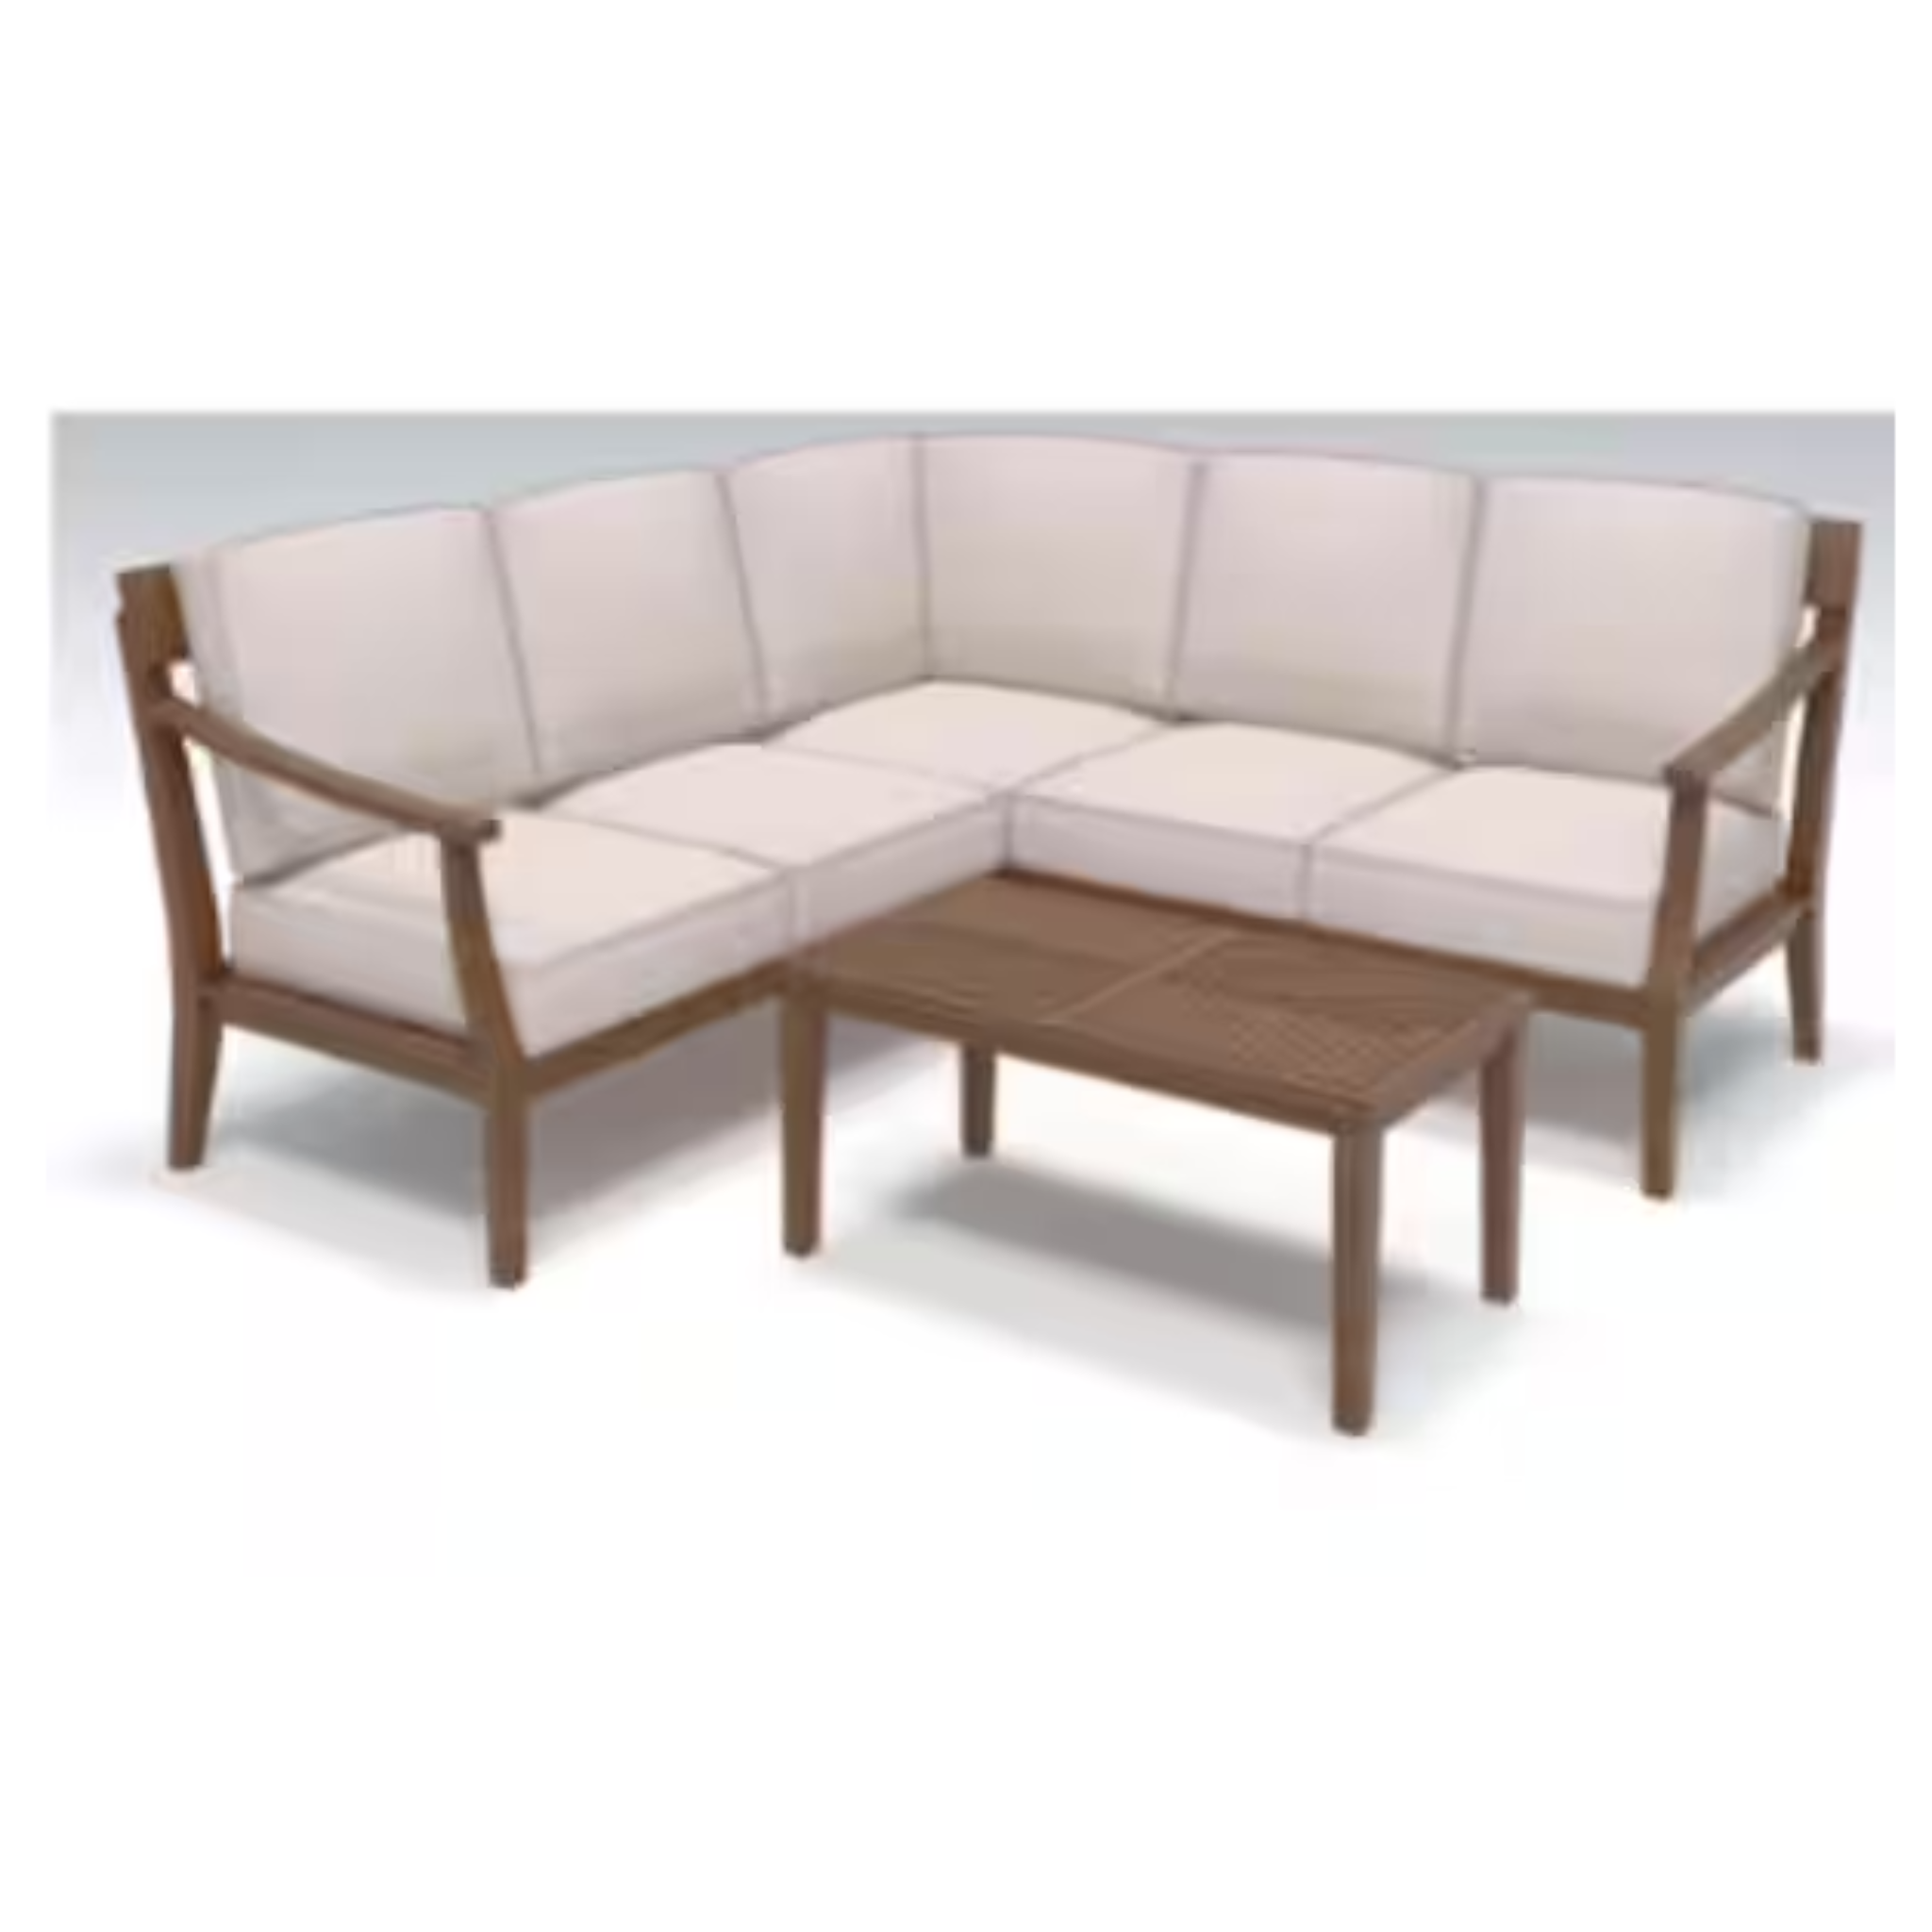 Woodford Eucalyptus Outdoor Corner Chair with CushionGuard Bright White Cushions